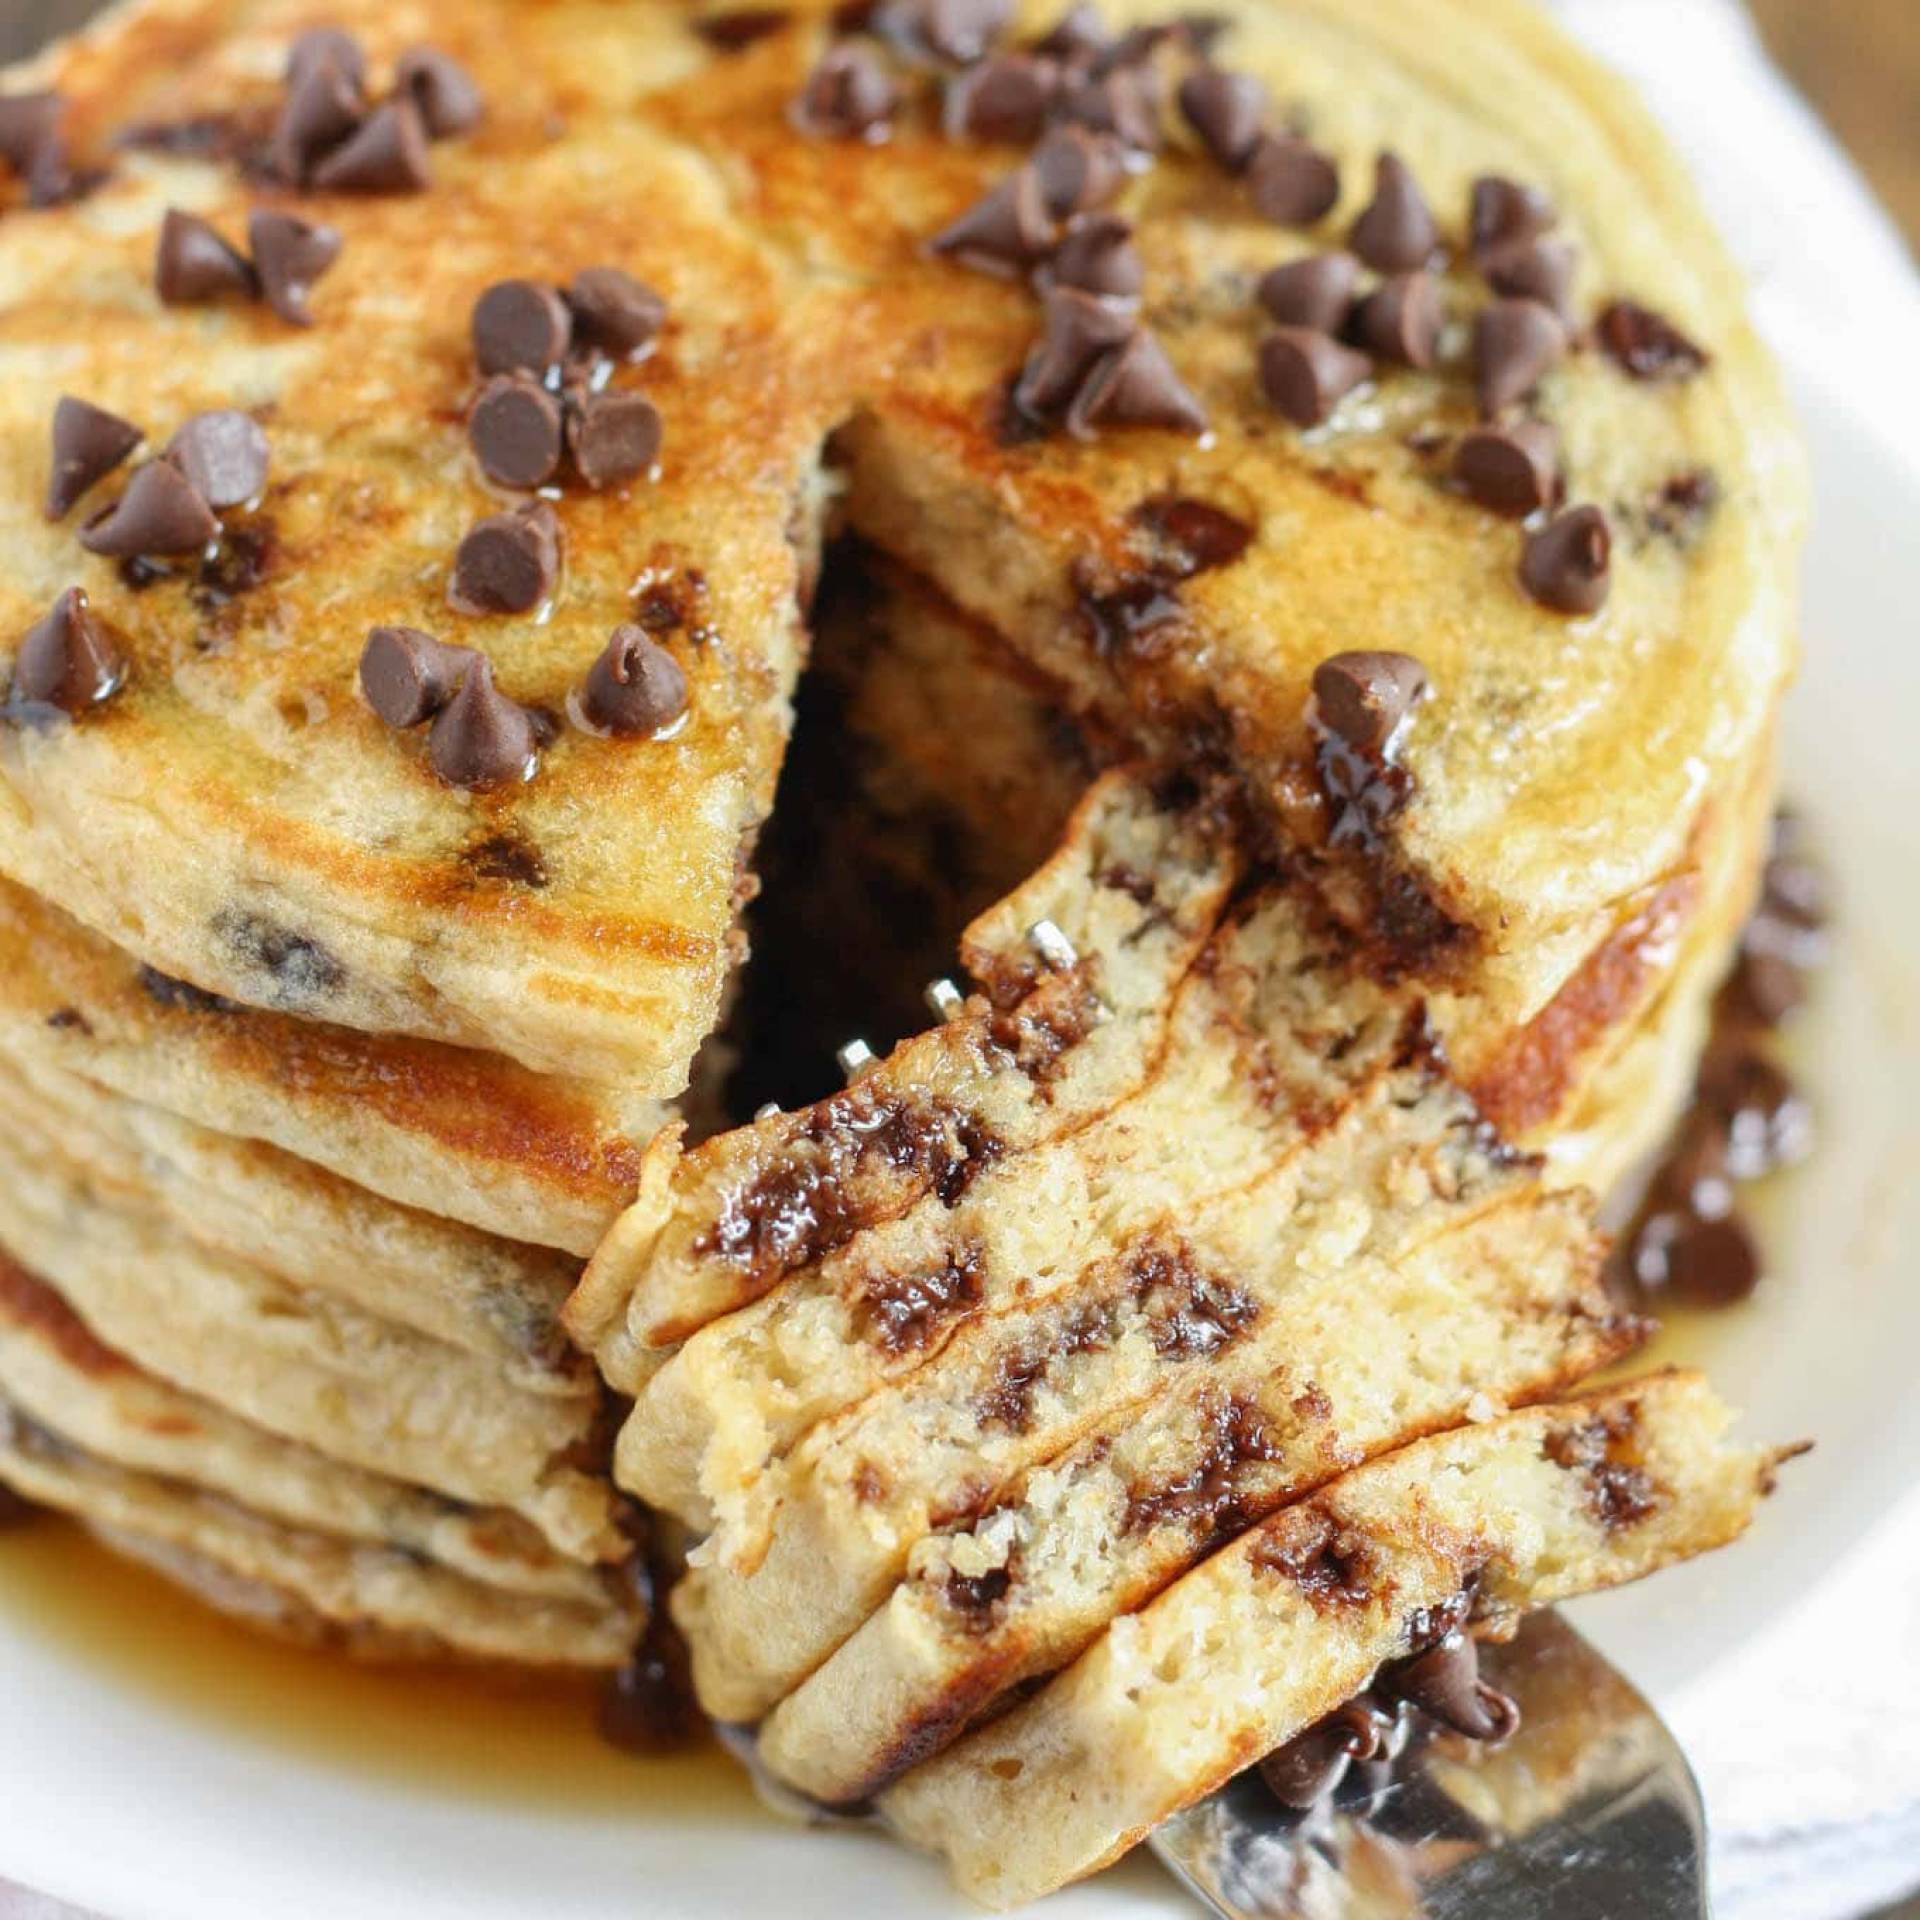 Choco chips & nuts pancakes